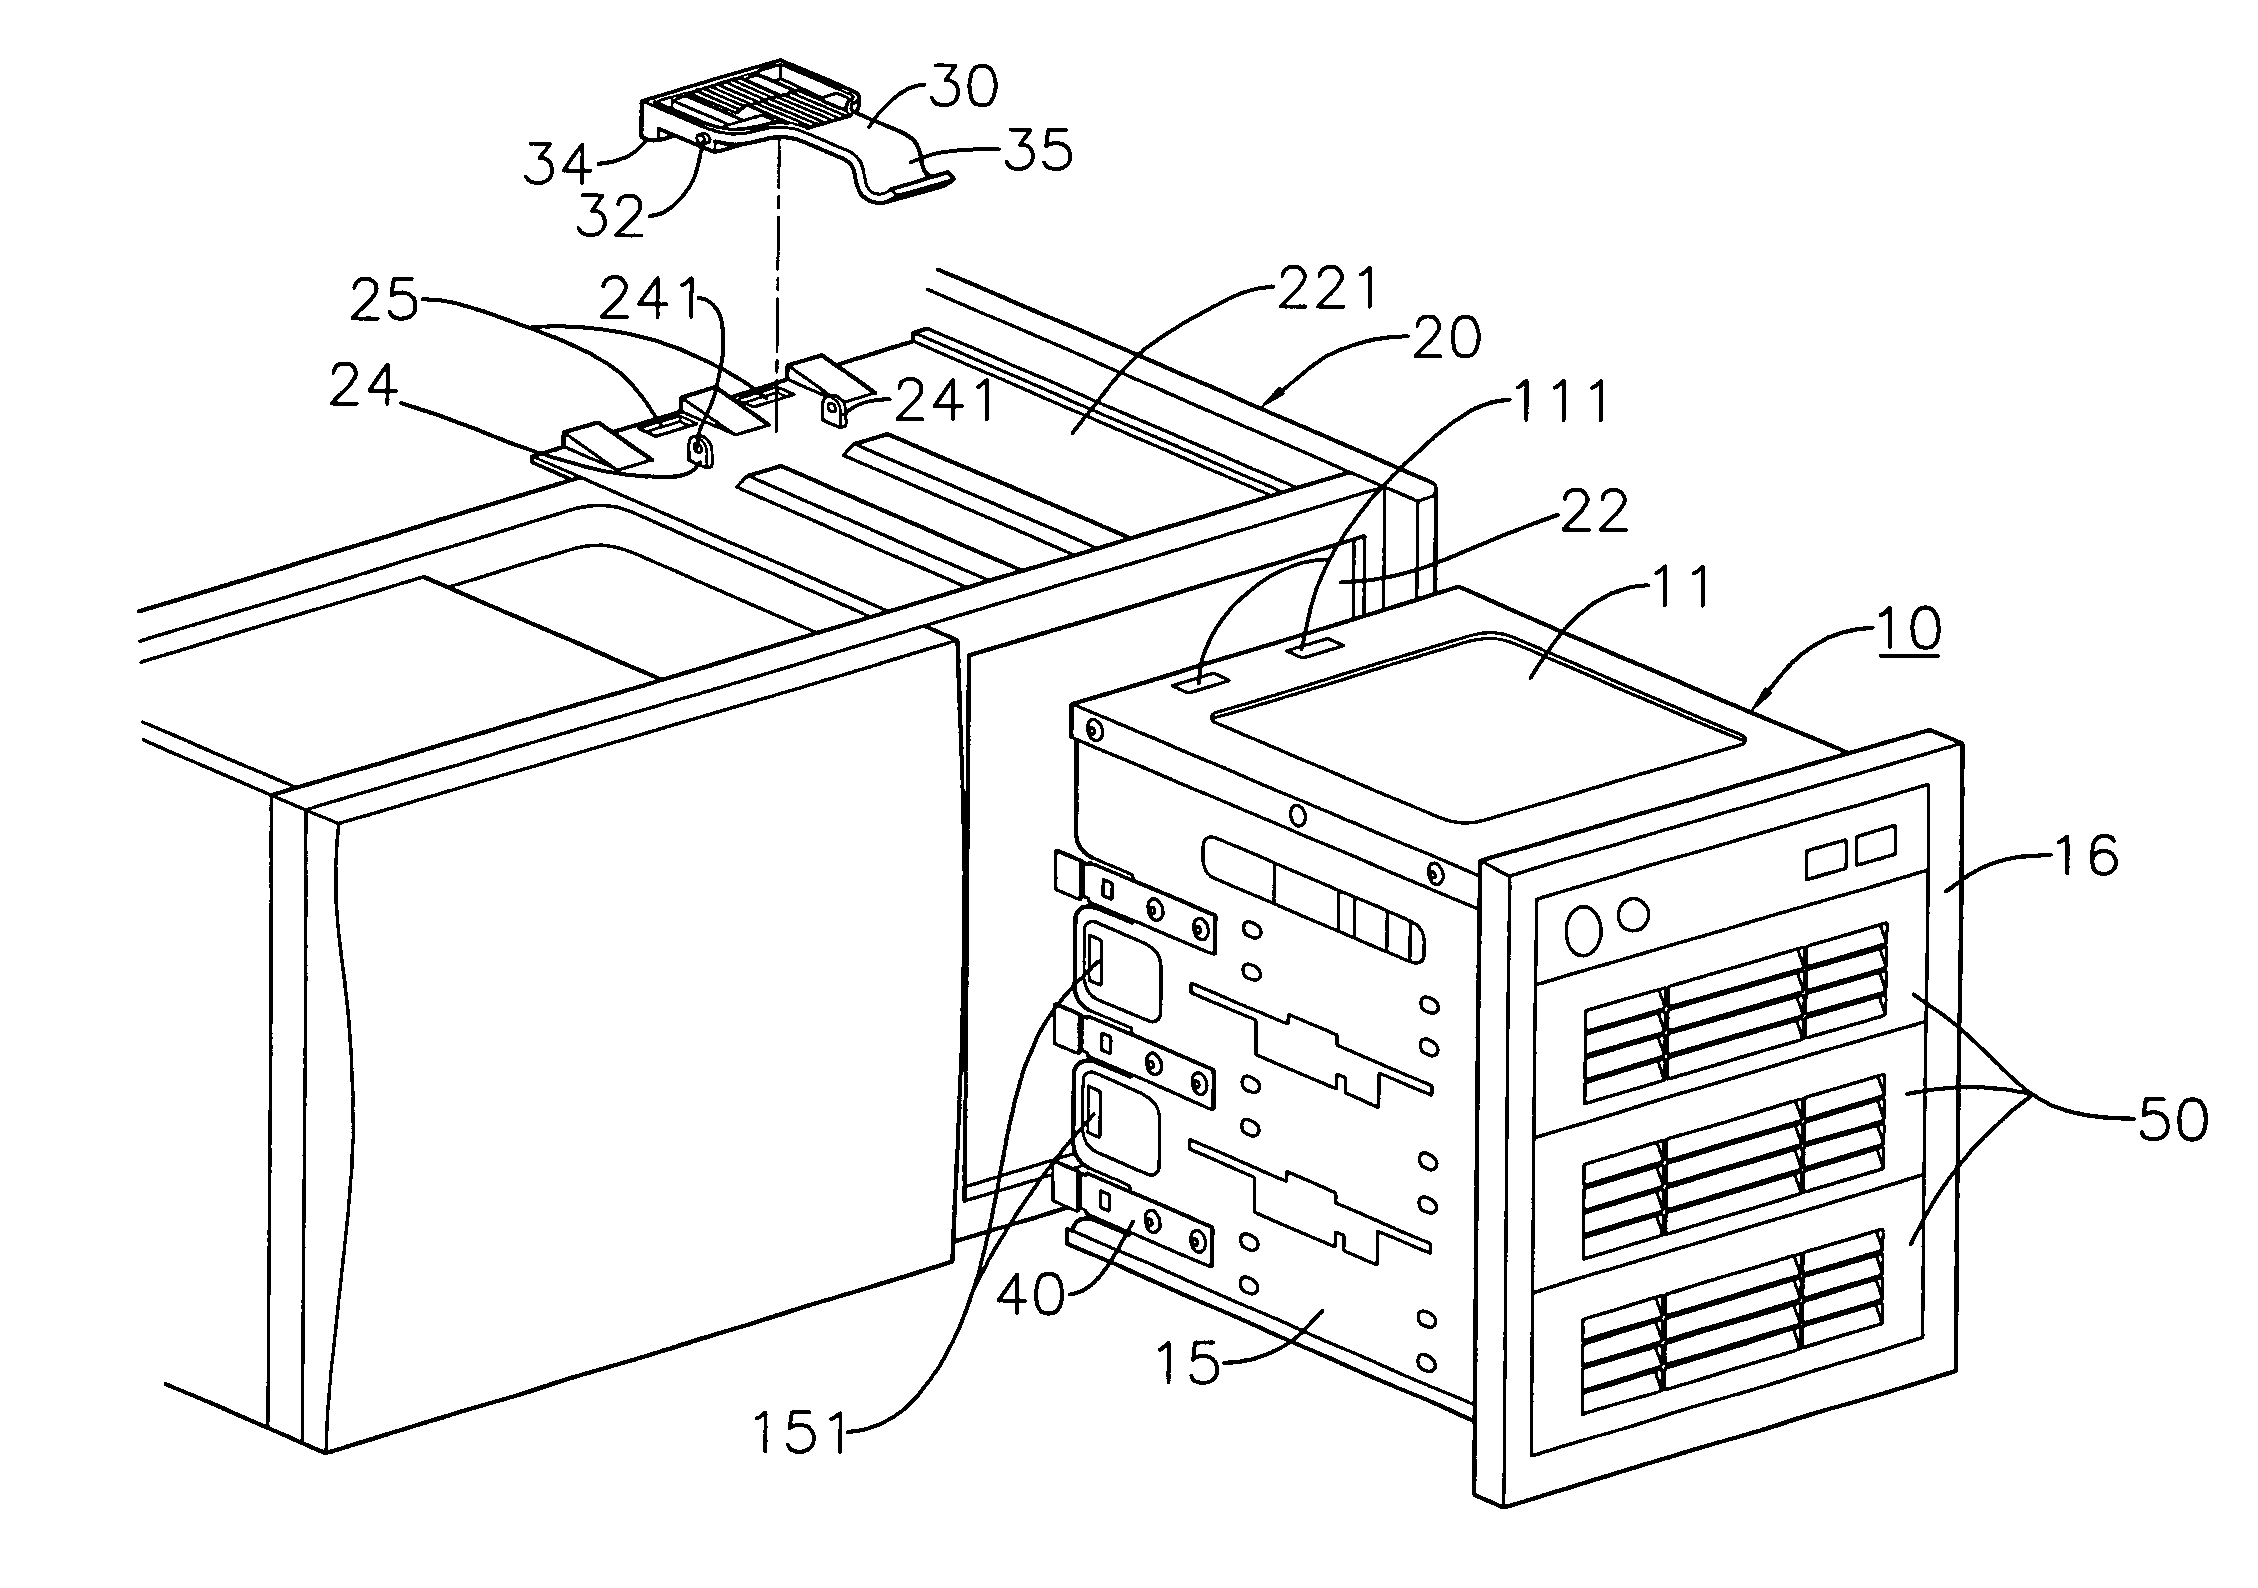 Block-shape container which can be assembled into and disassembled from a computer casing